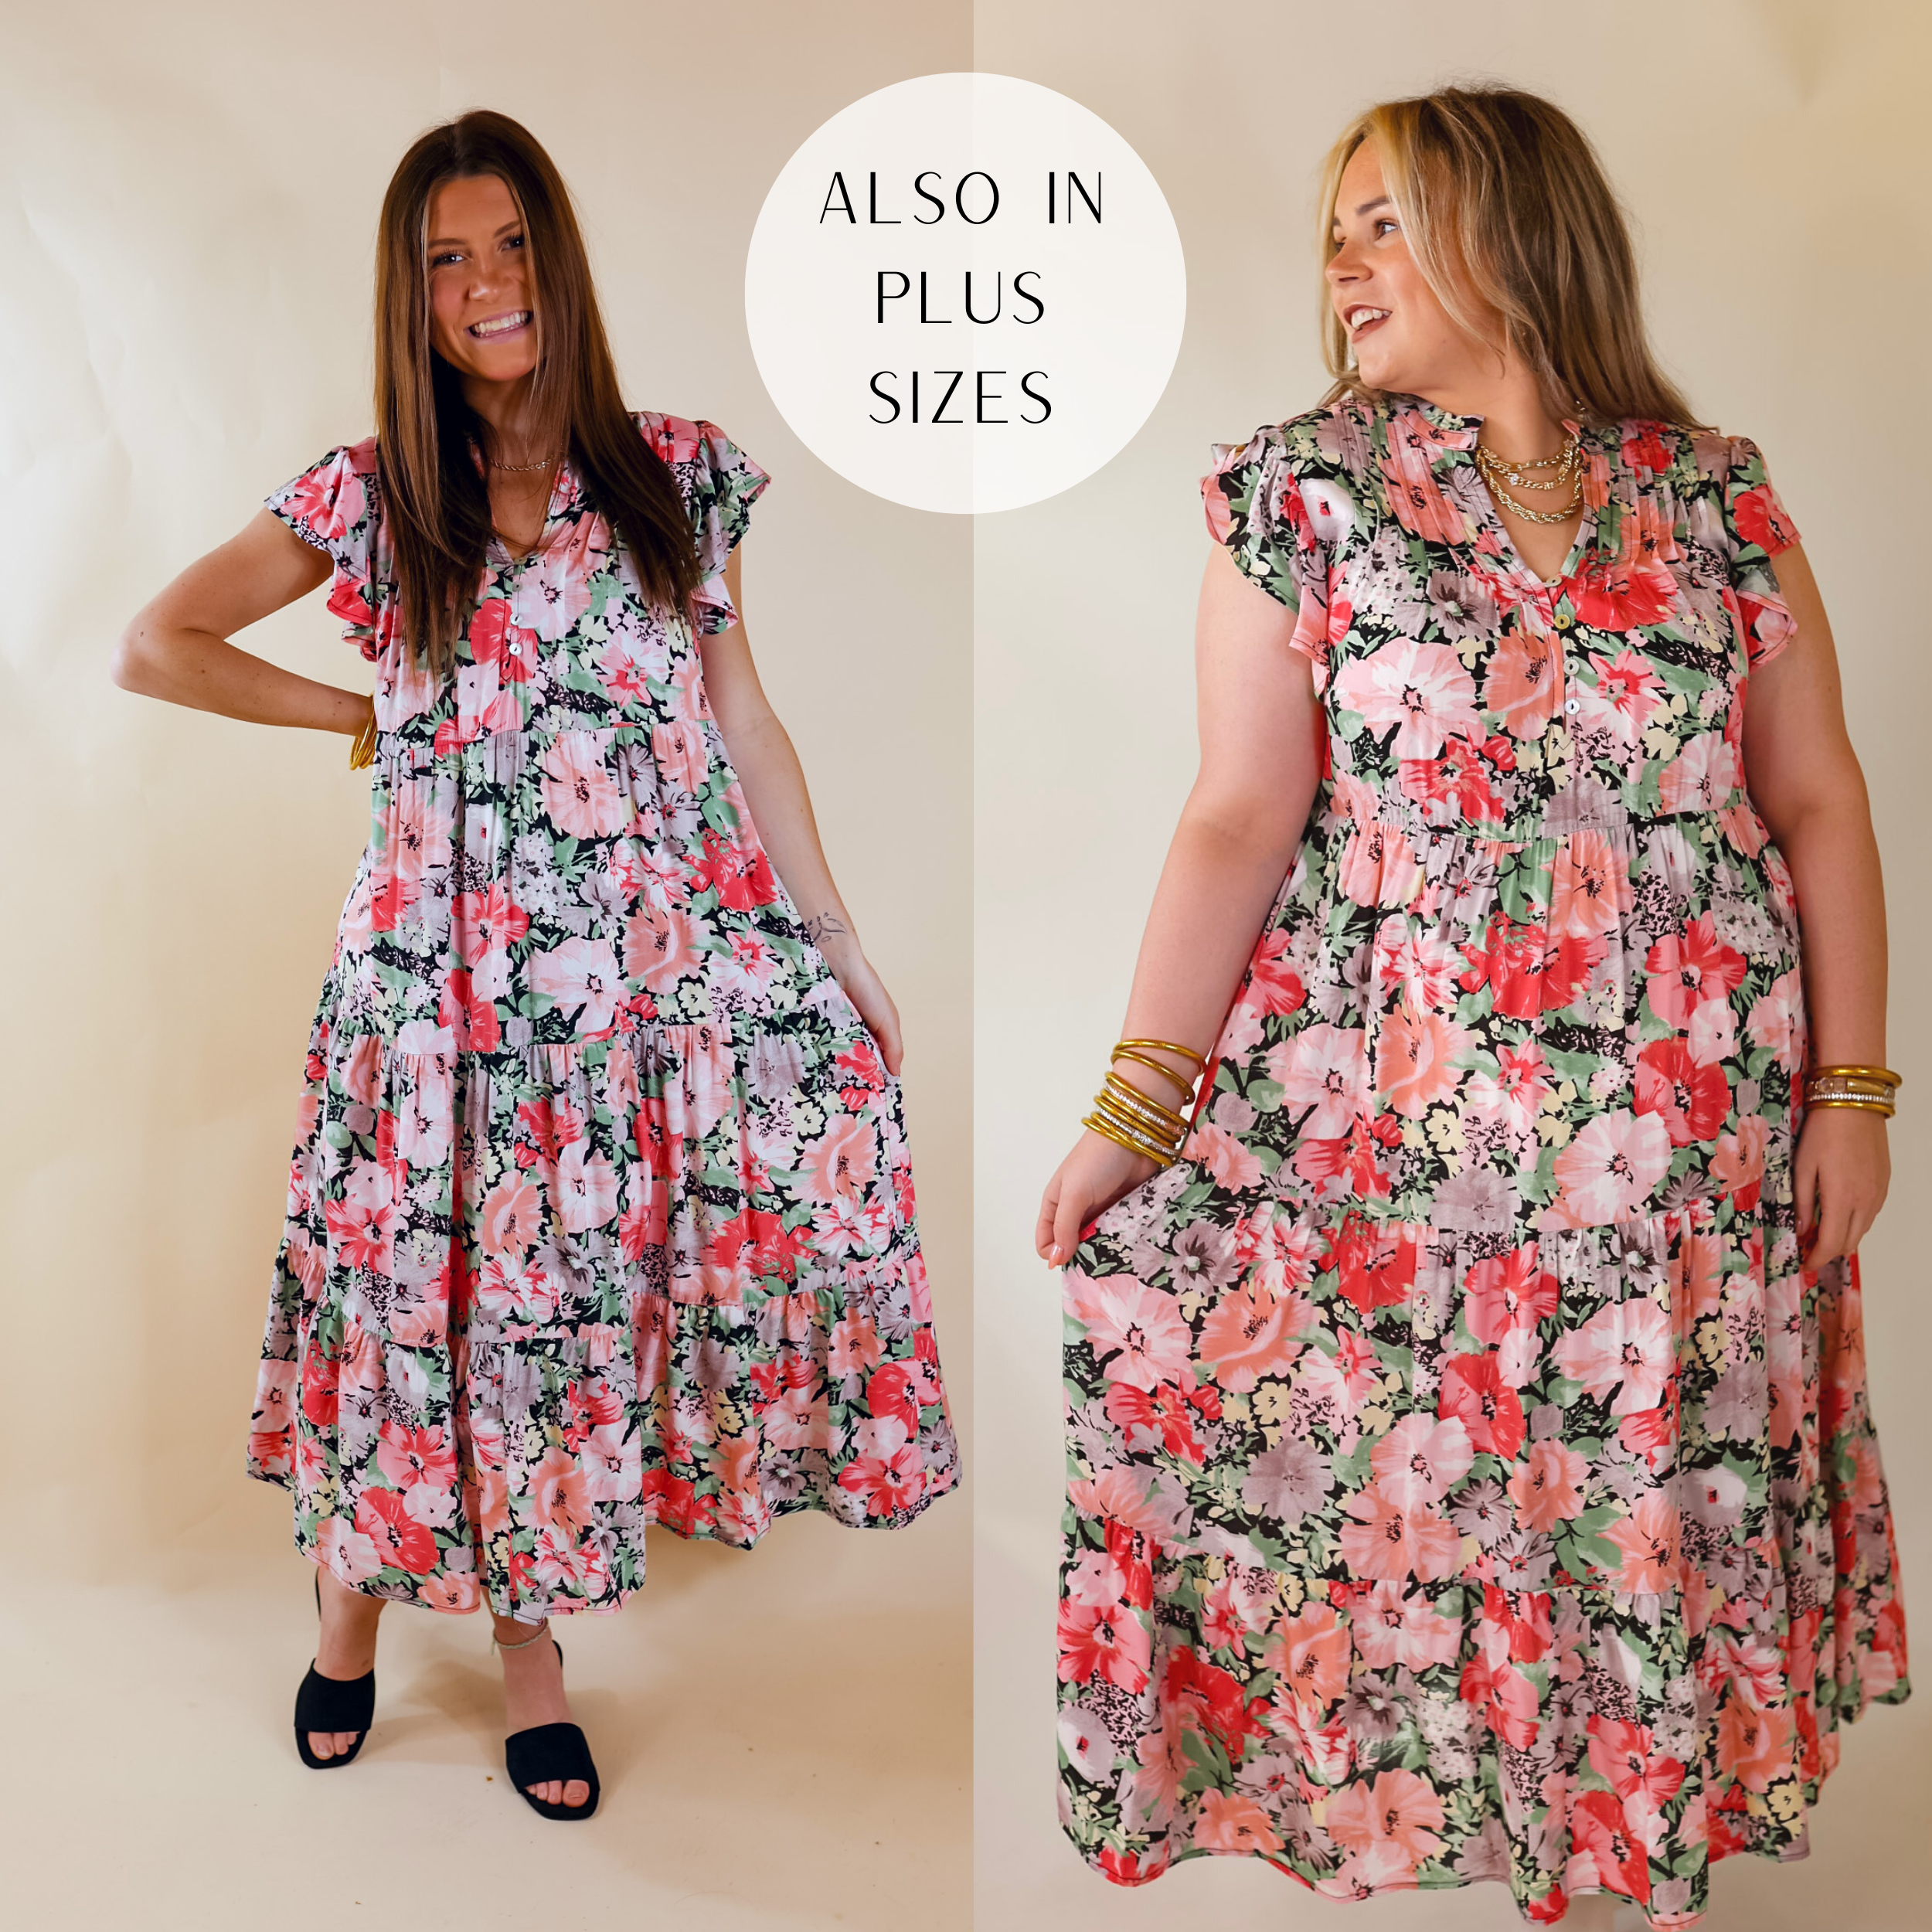 A multicolor relaxed fit midi dress. Item has a floral pattern in light pink, dark pink, pale pink with hints of dark blue/black between each flower. Also features V neckline, ruffled flowy sleeves, and pleated skirt. Item is pictured on a pale pink background